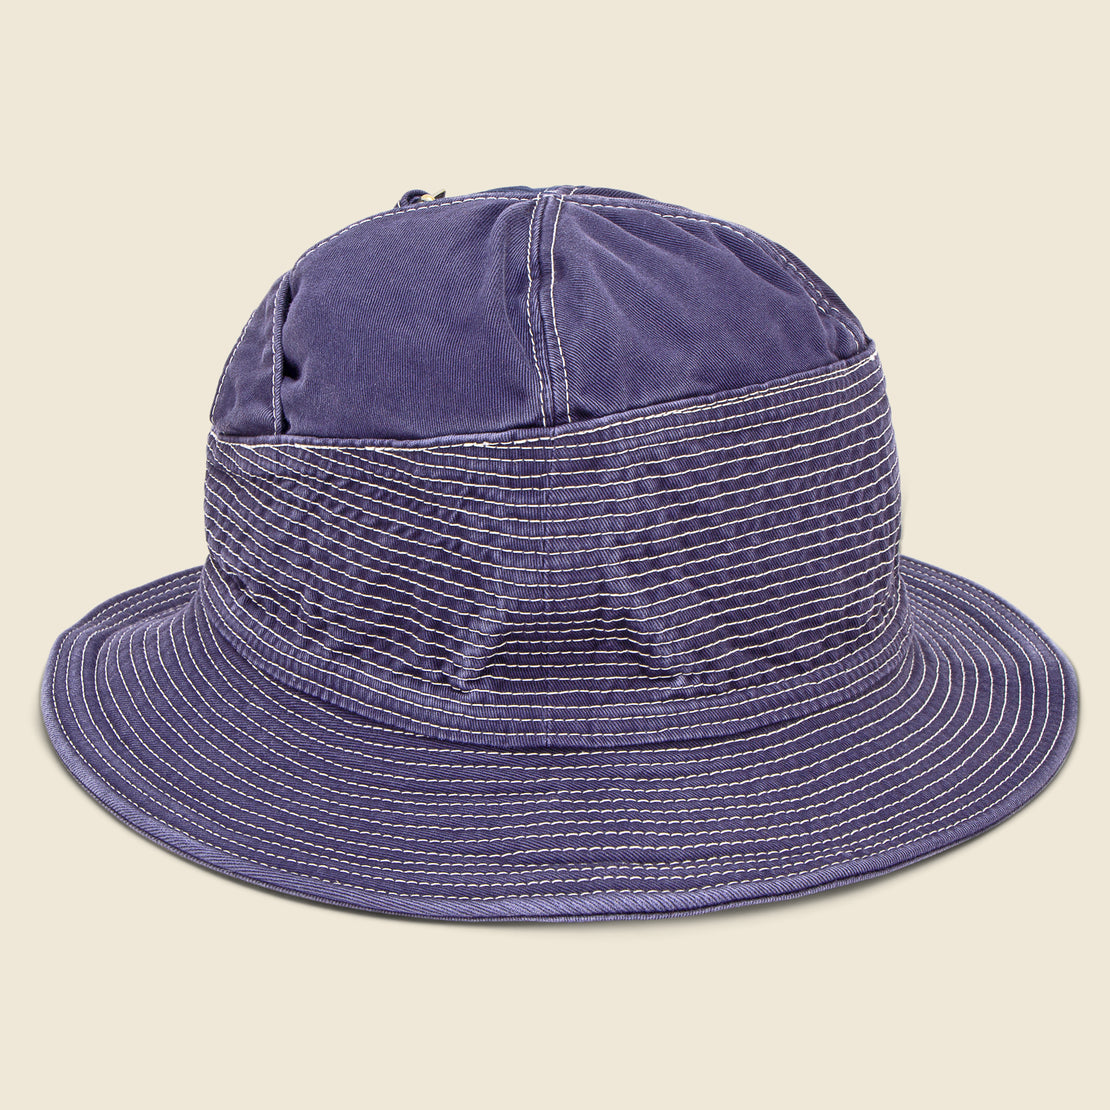 Kapital The Old Man and the Sea Chino Bucket Hat - Navy